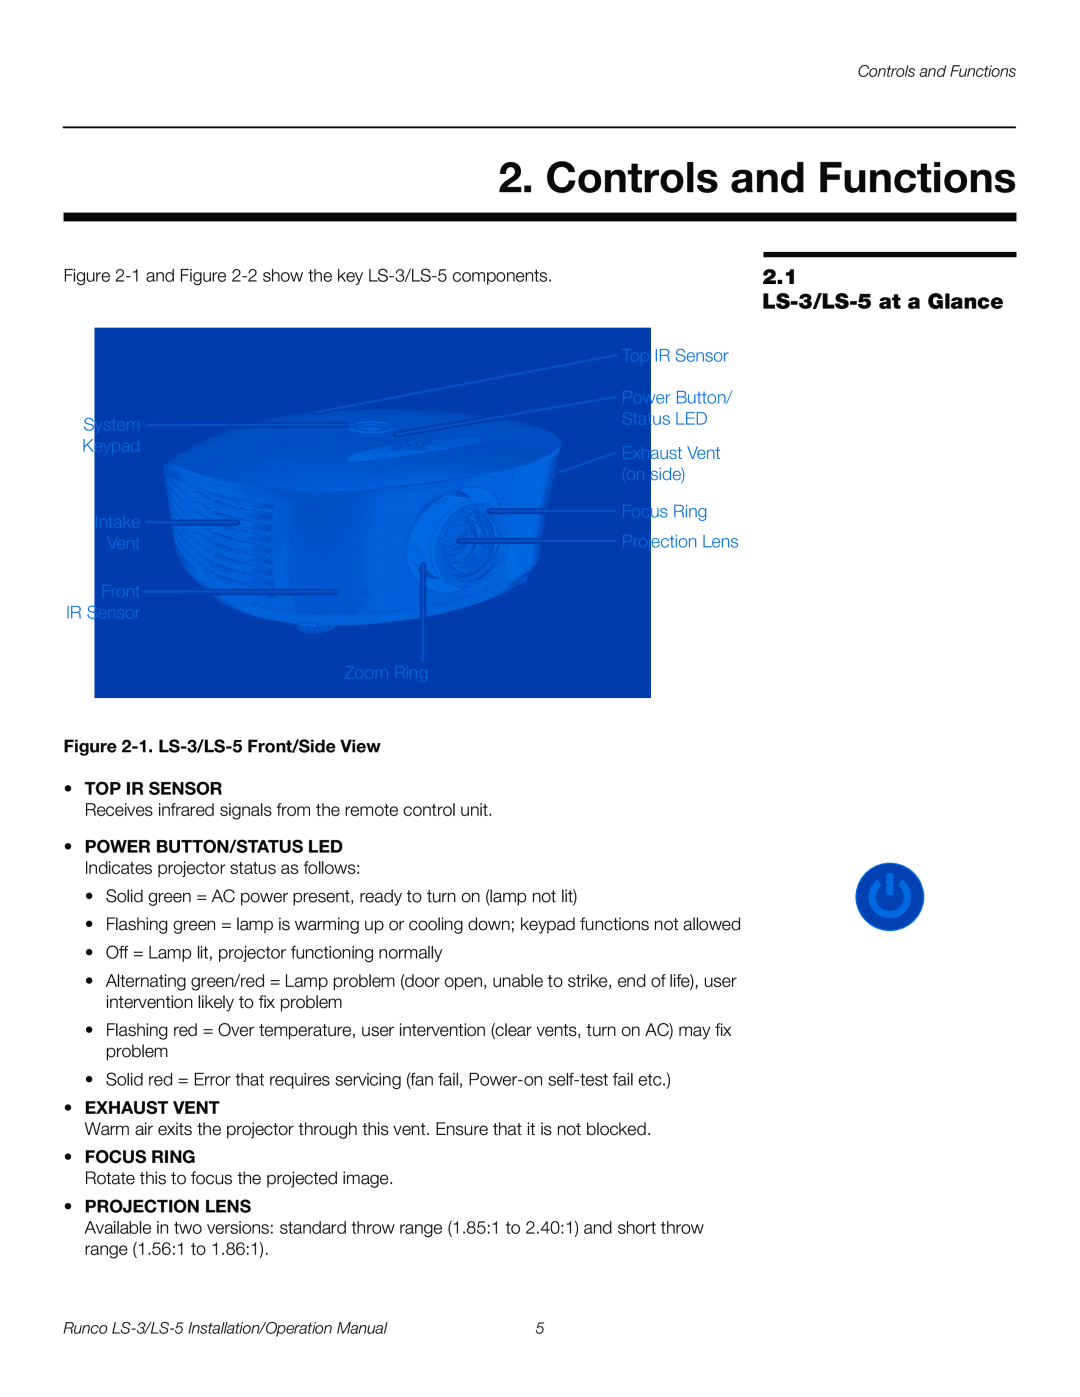 Runco operation manual Controls and Functions, 2.1 LS-3/LS-5at a Glance 